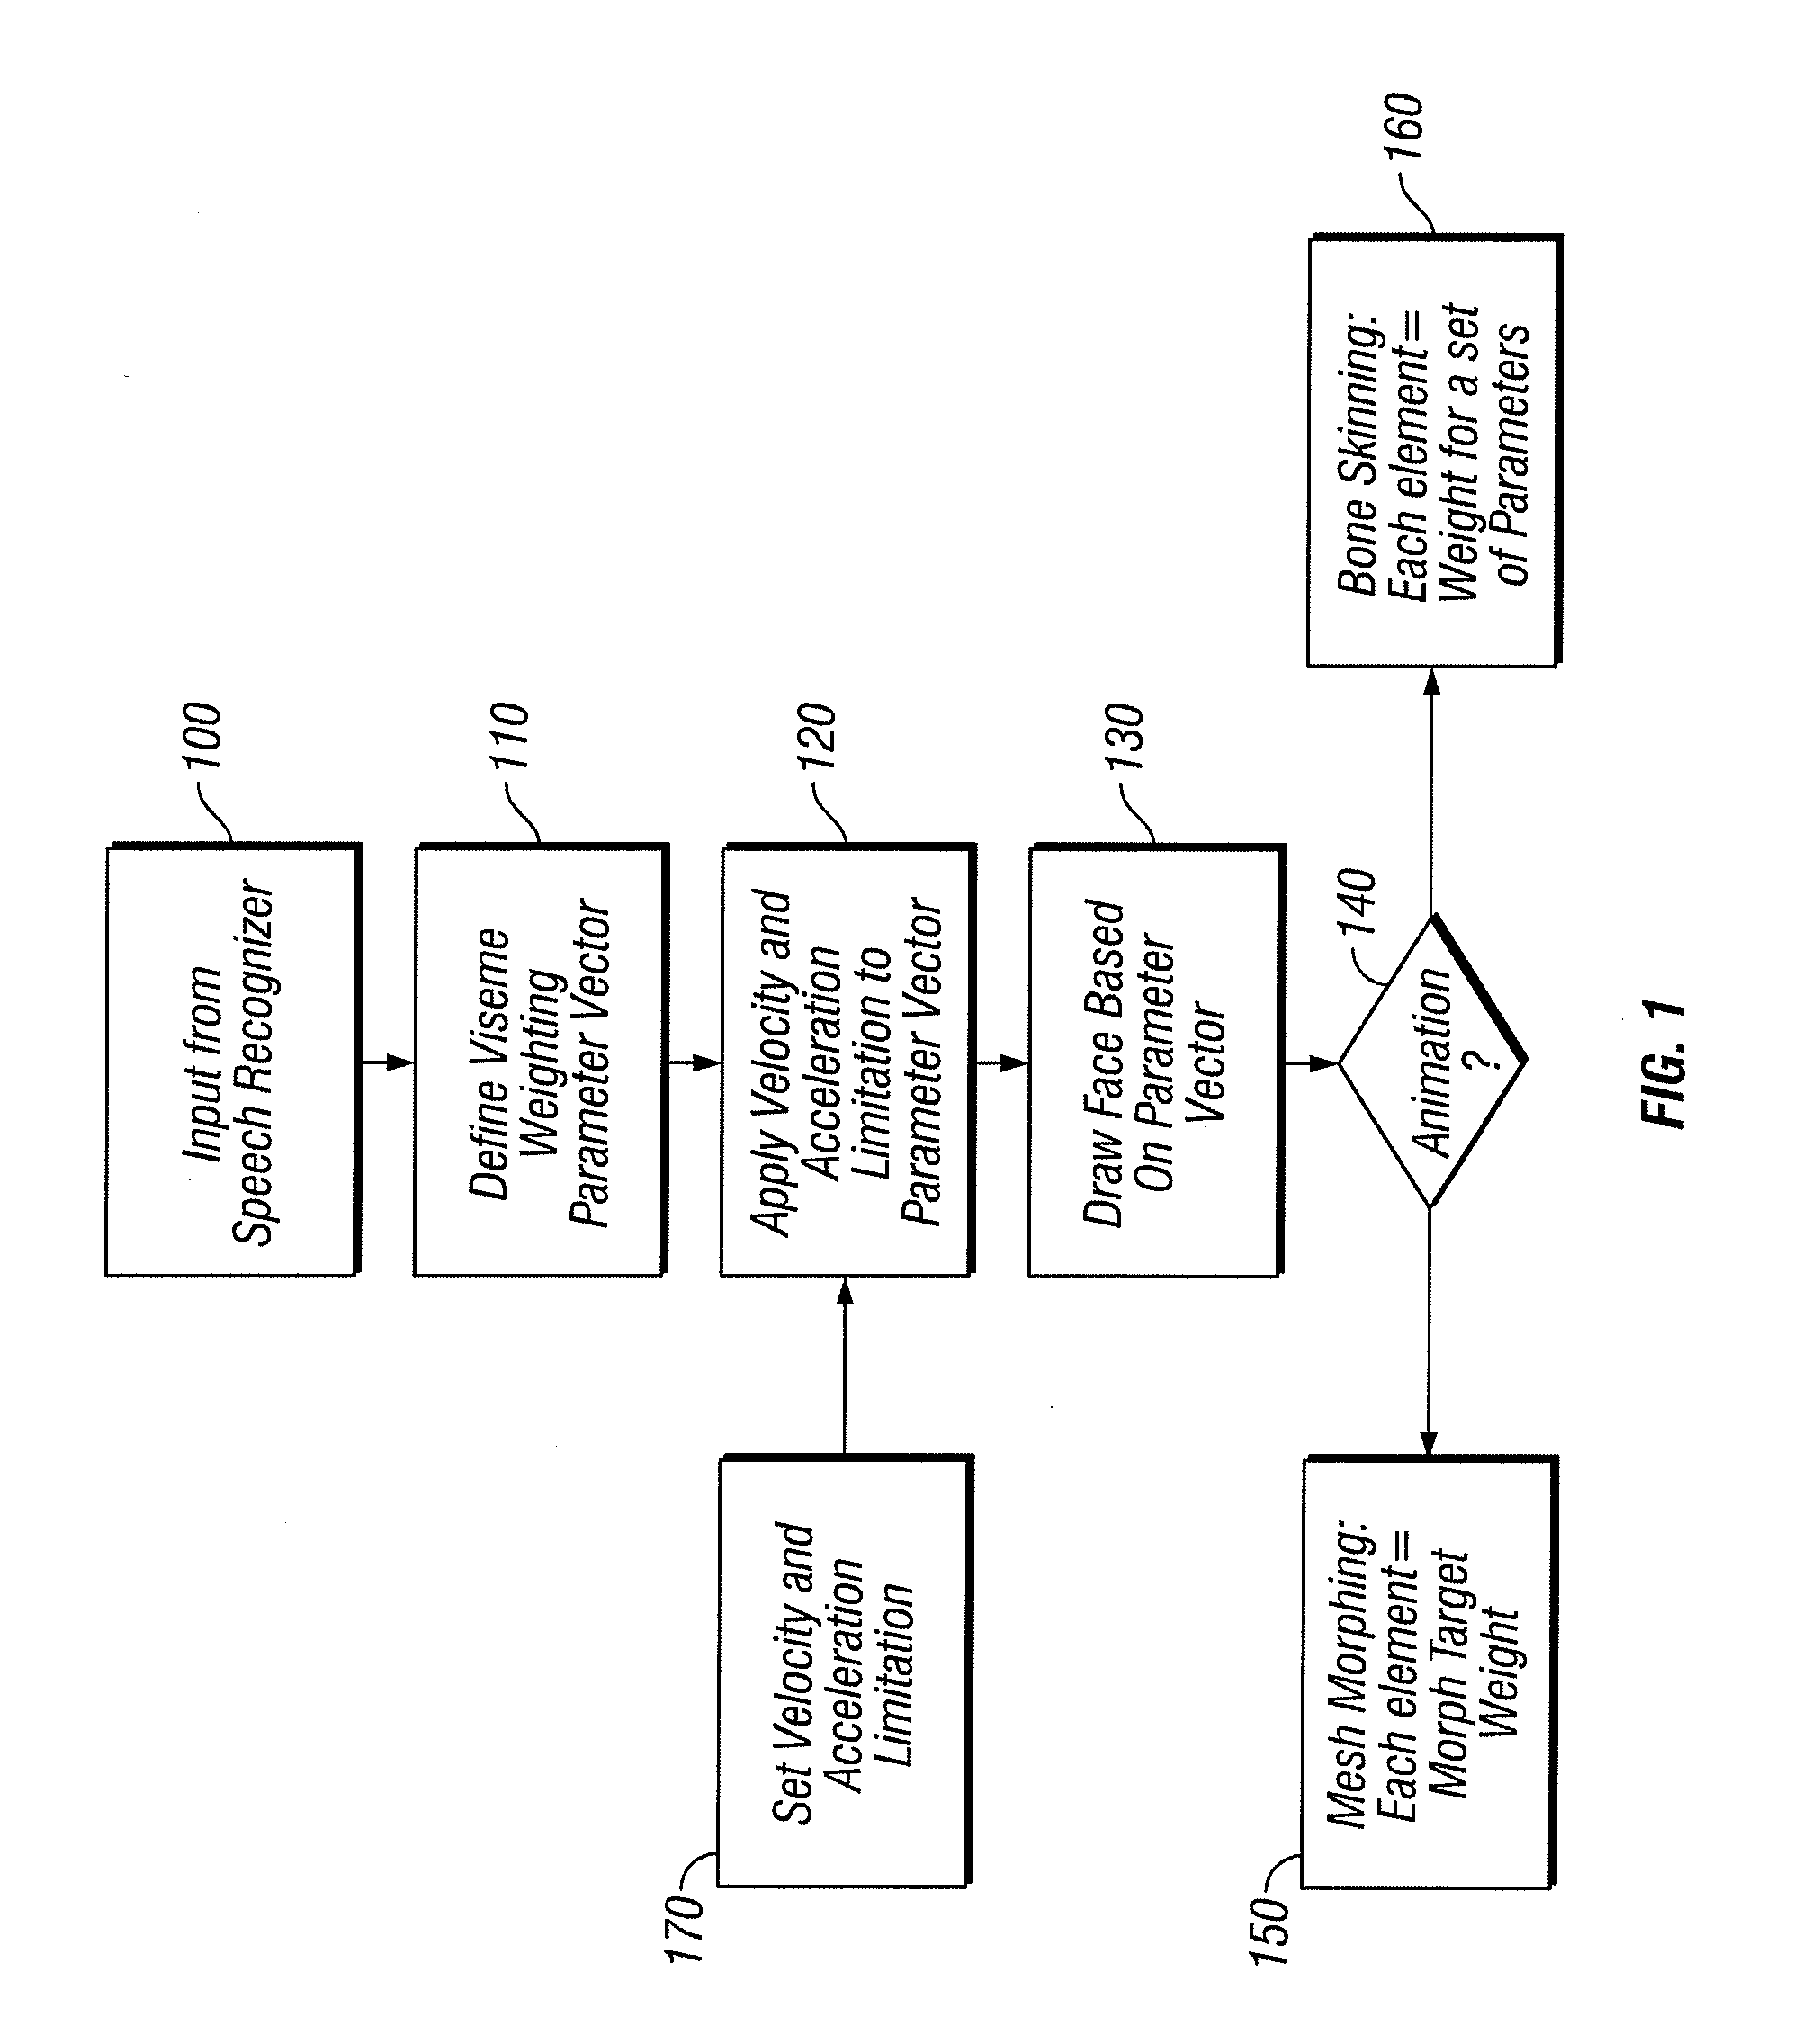 Method and Apparatus for Providing Natural Facial Animation